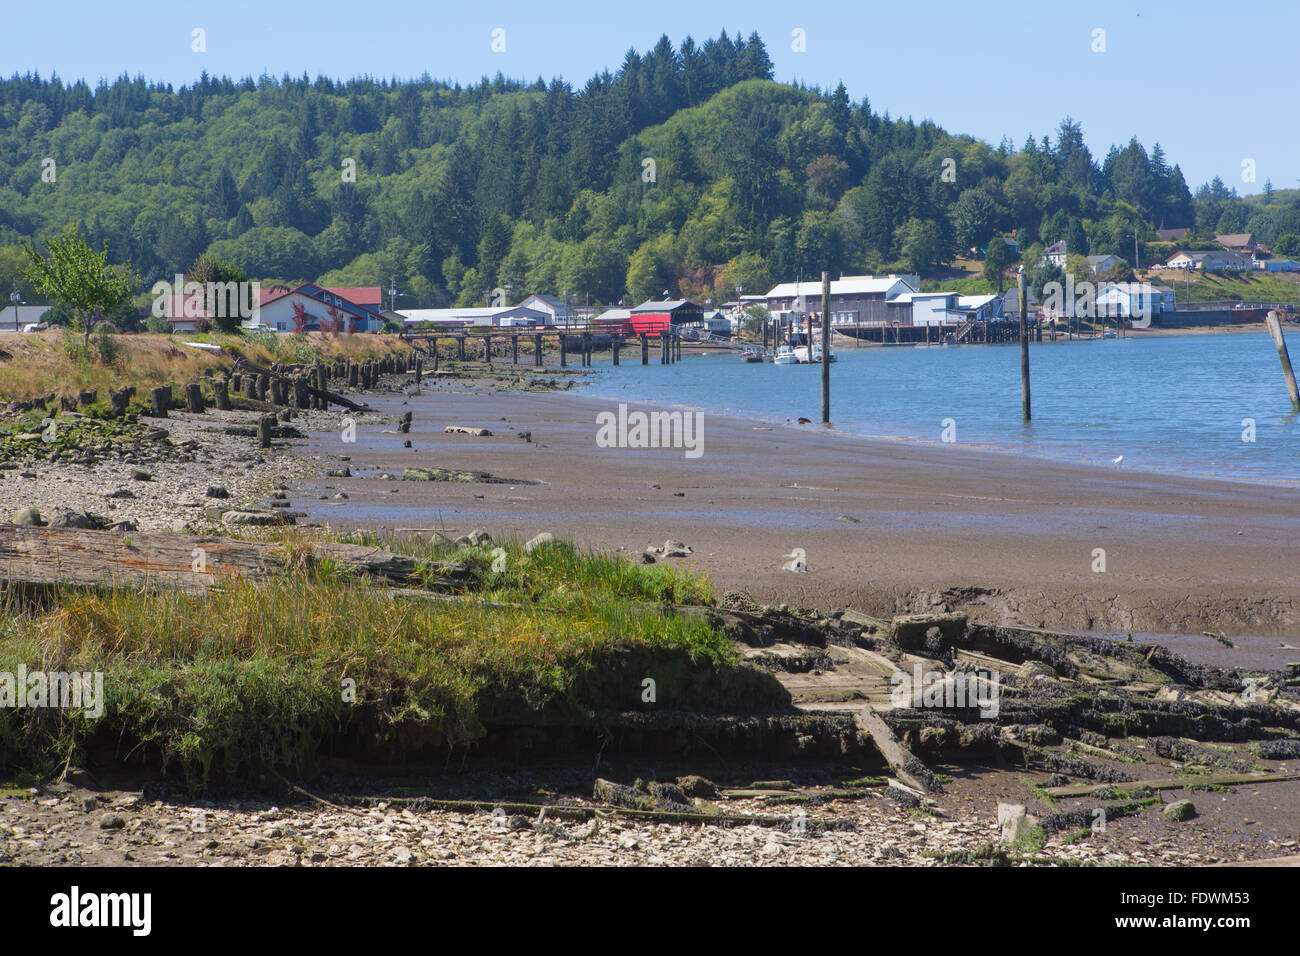 South Bend Wa USA once a thriving oyster producing area showing low tide along teh river Stock Photo